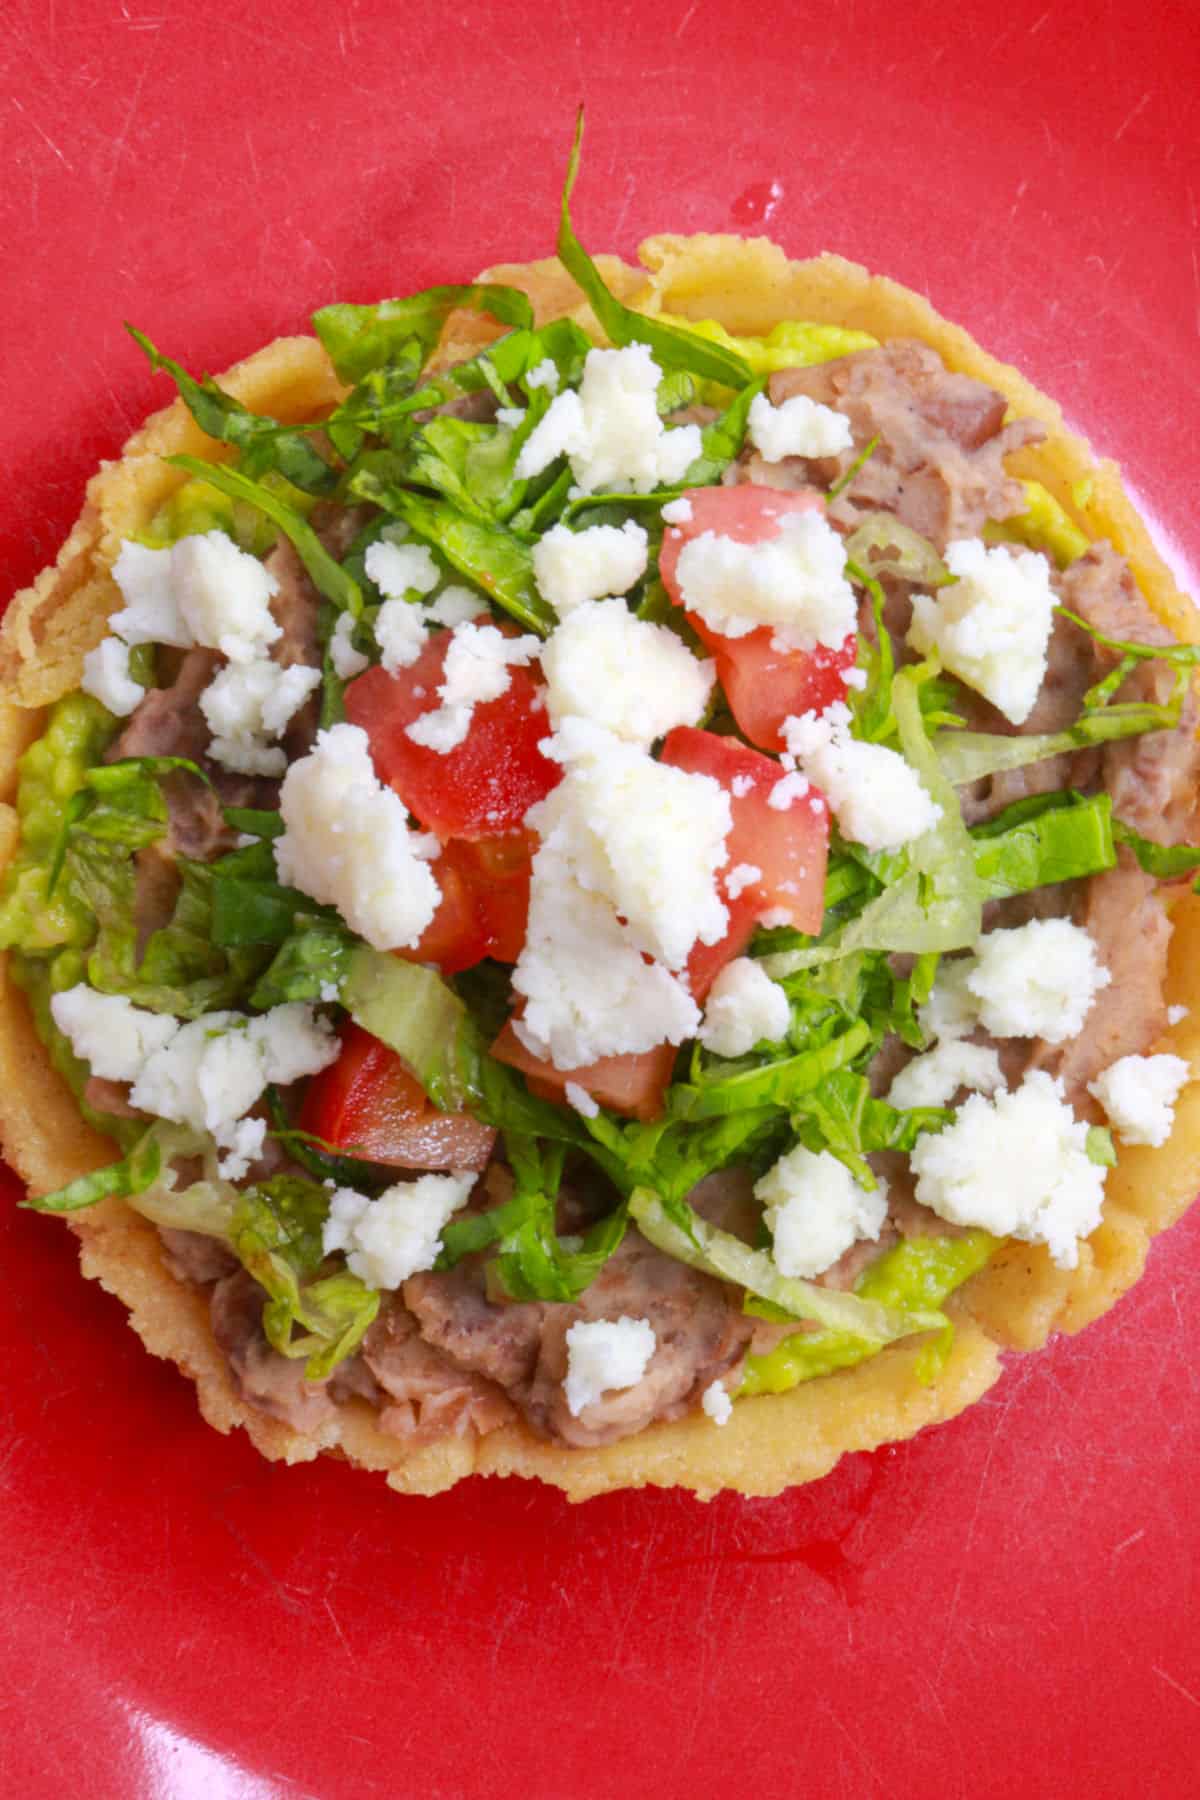 Sope de frijoles garnished with lettuce, tomato and queso fresco